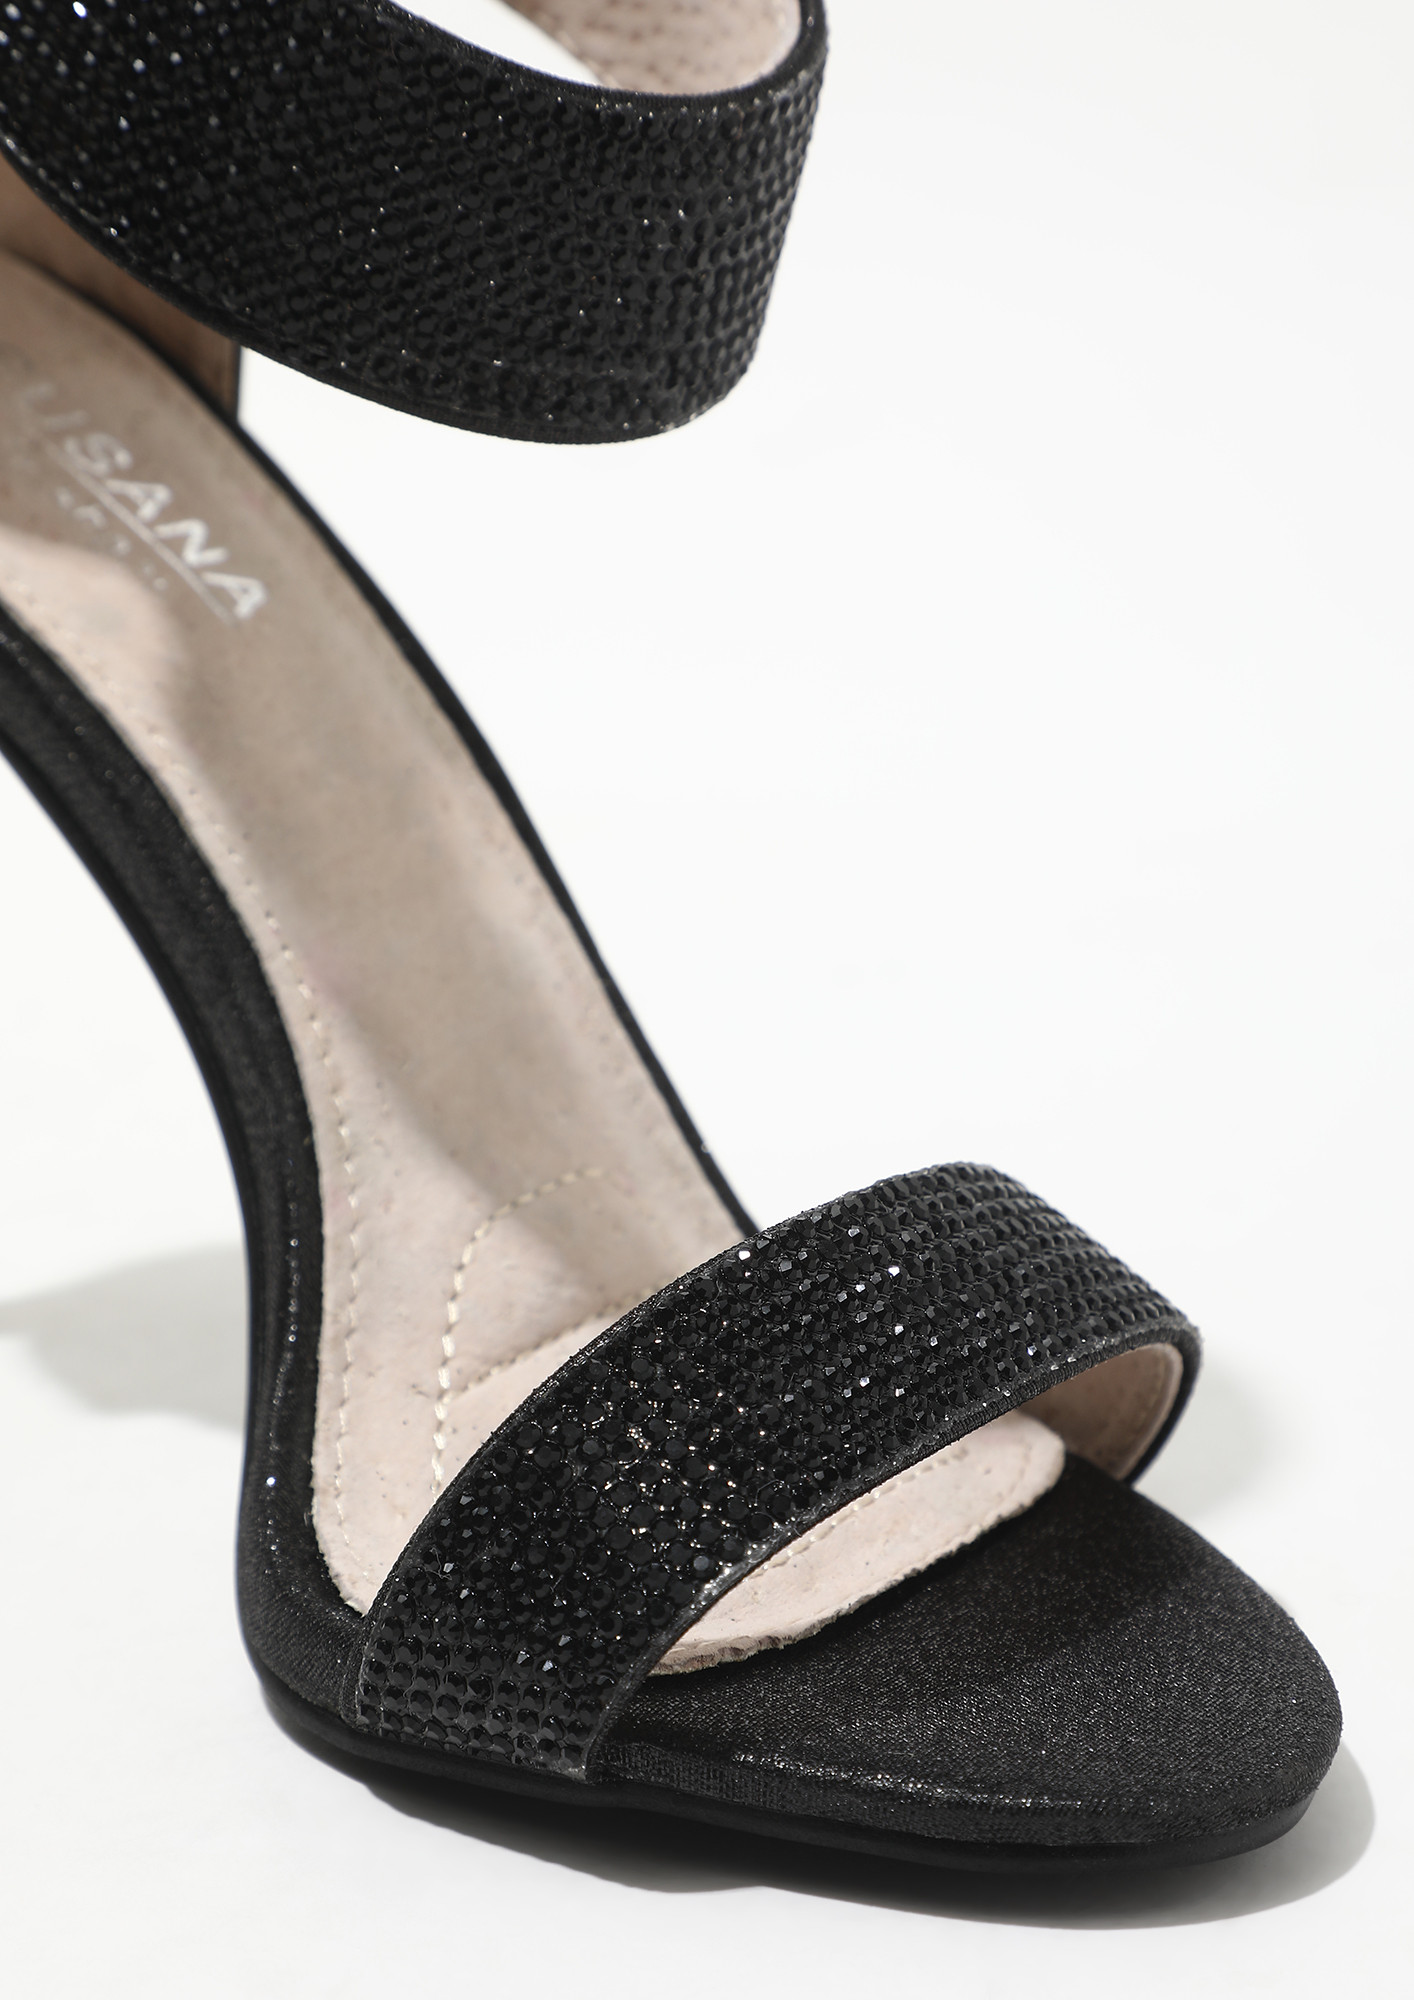 Buy DCC Sparkle Black Shade Bellie Heels For Girls And Women Size 34 at  Amazon.in